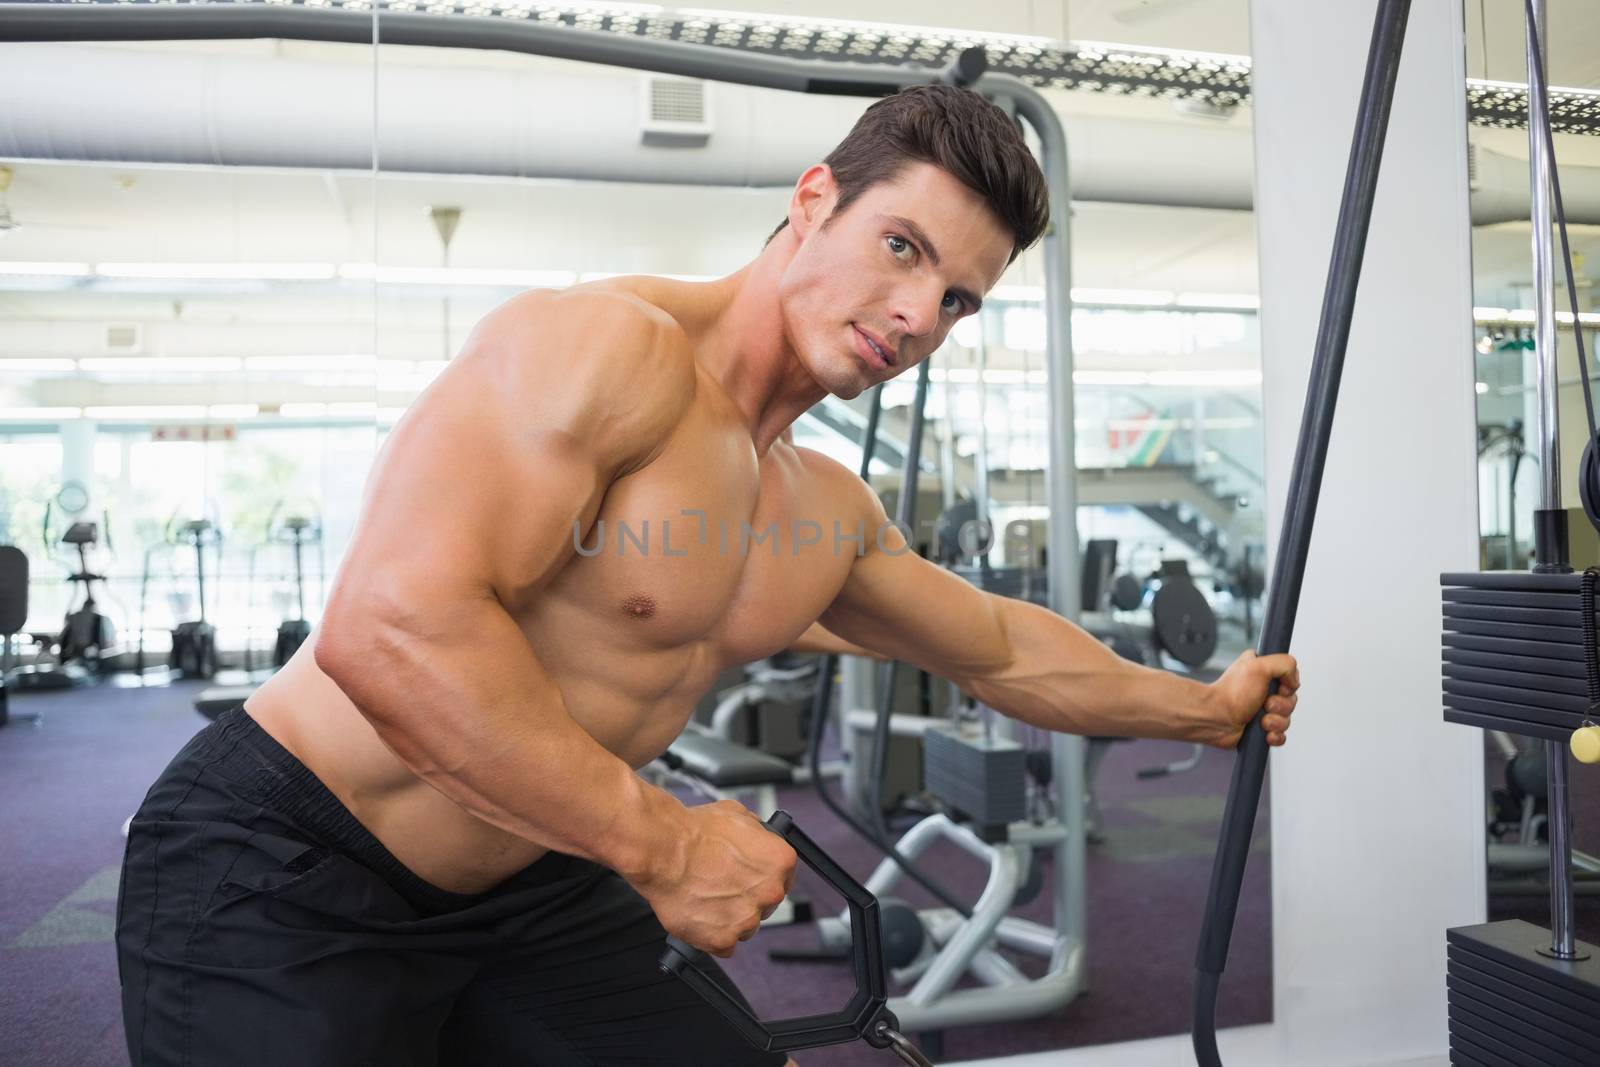 Side view of a shirtless young muscular man using resistance band in gym